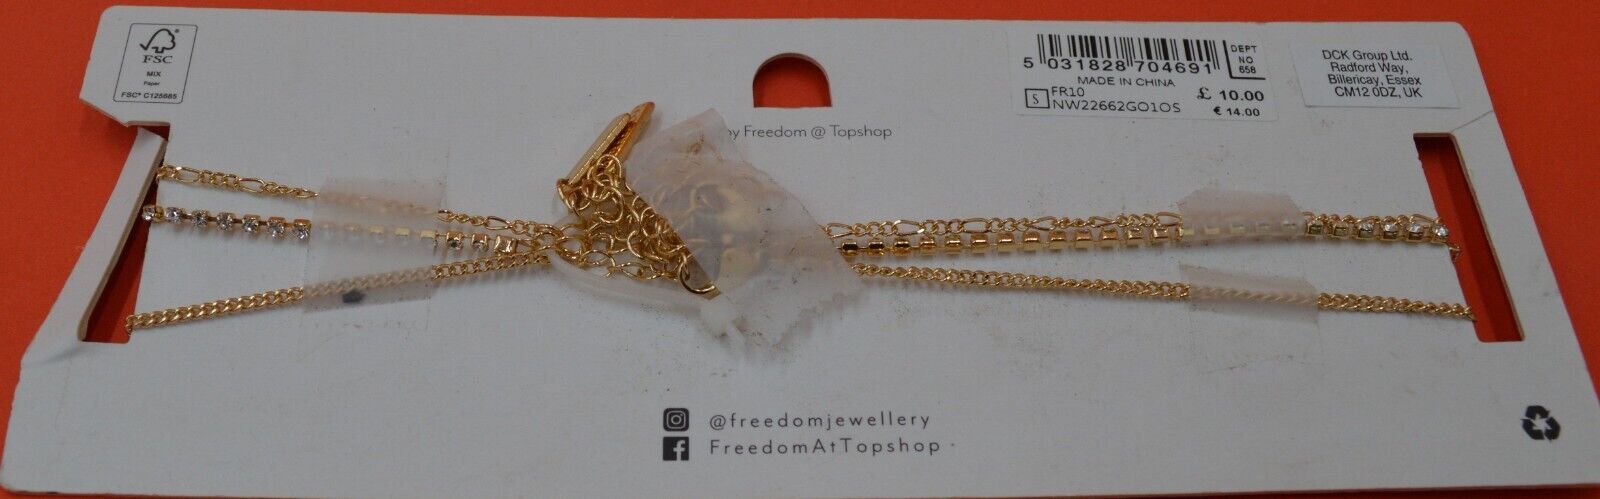 NEW TOPSHOP FREEDOM GOLD TONE CHOKER NECKLACE WITH ANGEL PENDANT - TMD167207